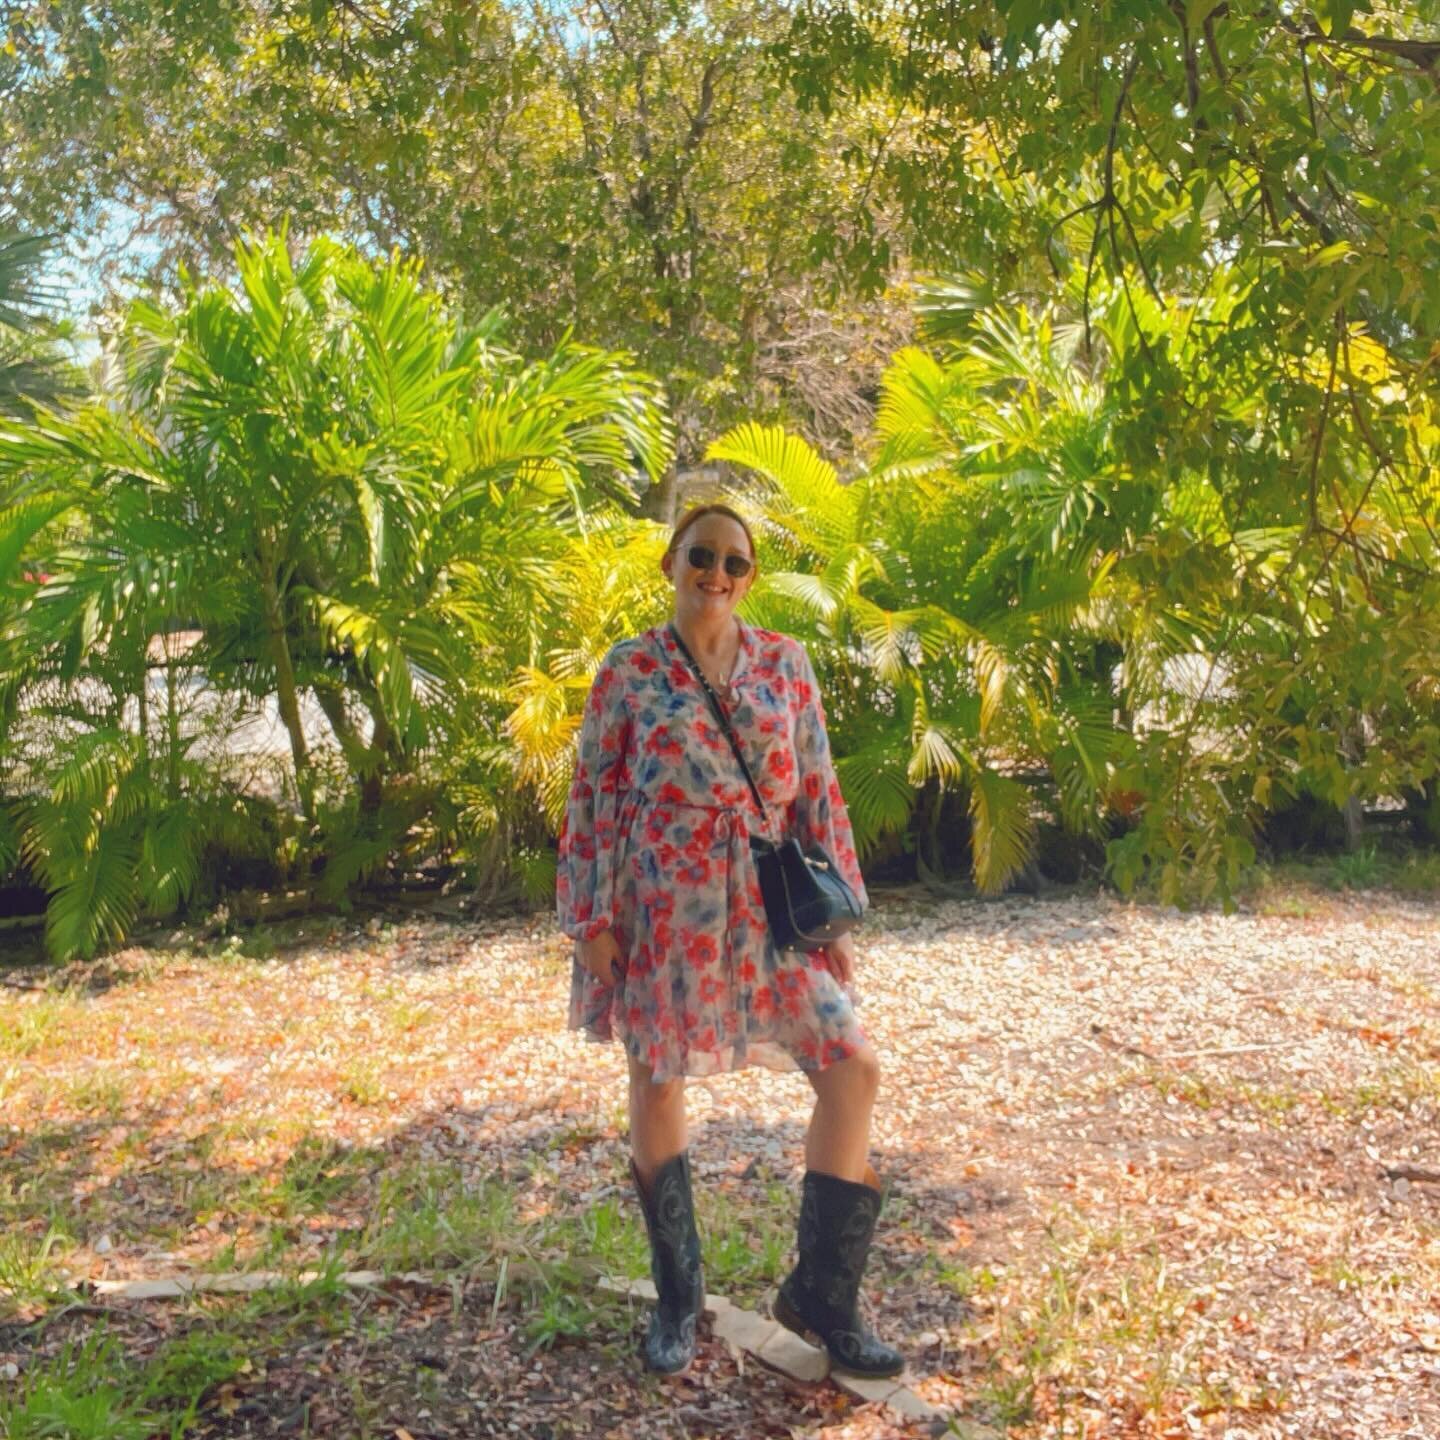 Don&rsquo;t look at my yard! But do look at my cowboy boots!

#midsizestyle #midsizefashion #midsize